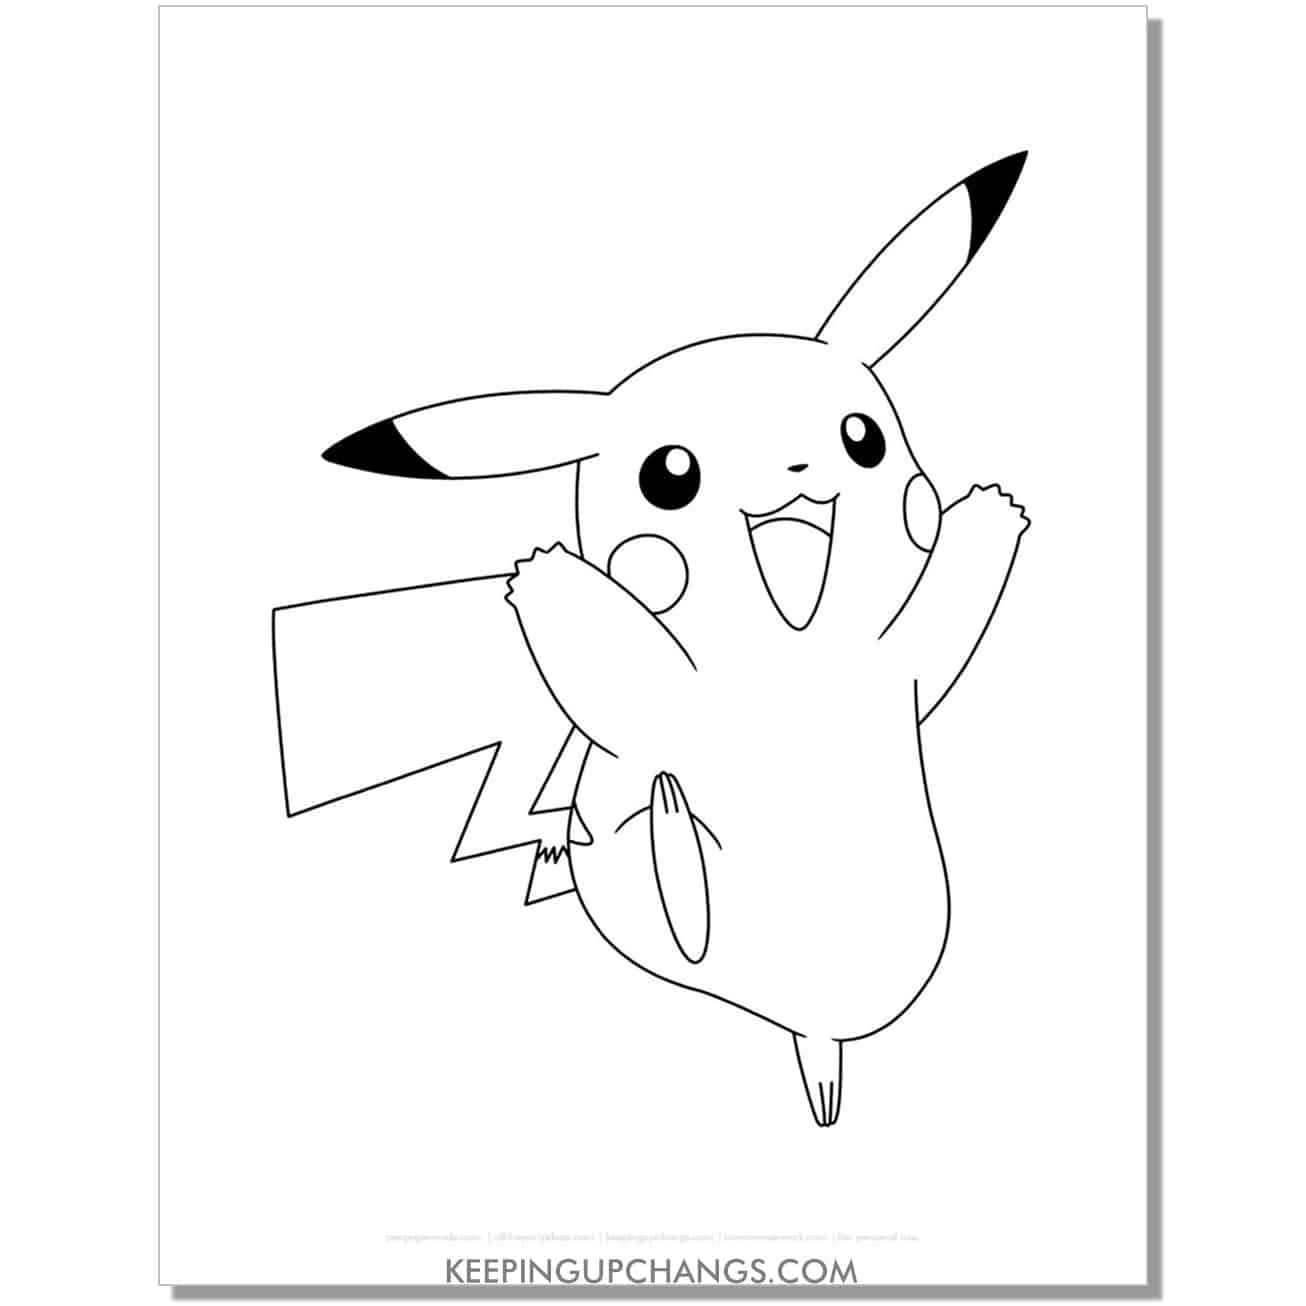 pikachu excited pokemon coloring page, sheet.